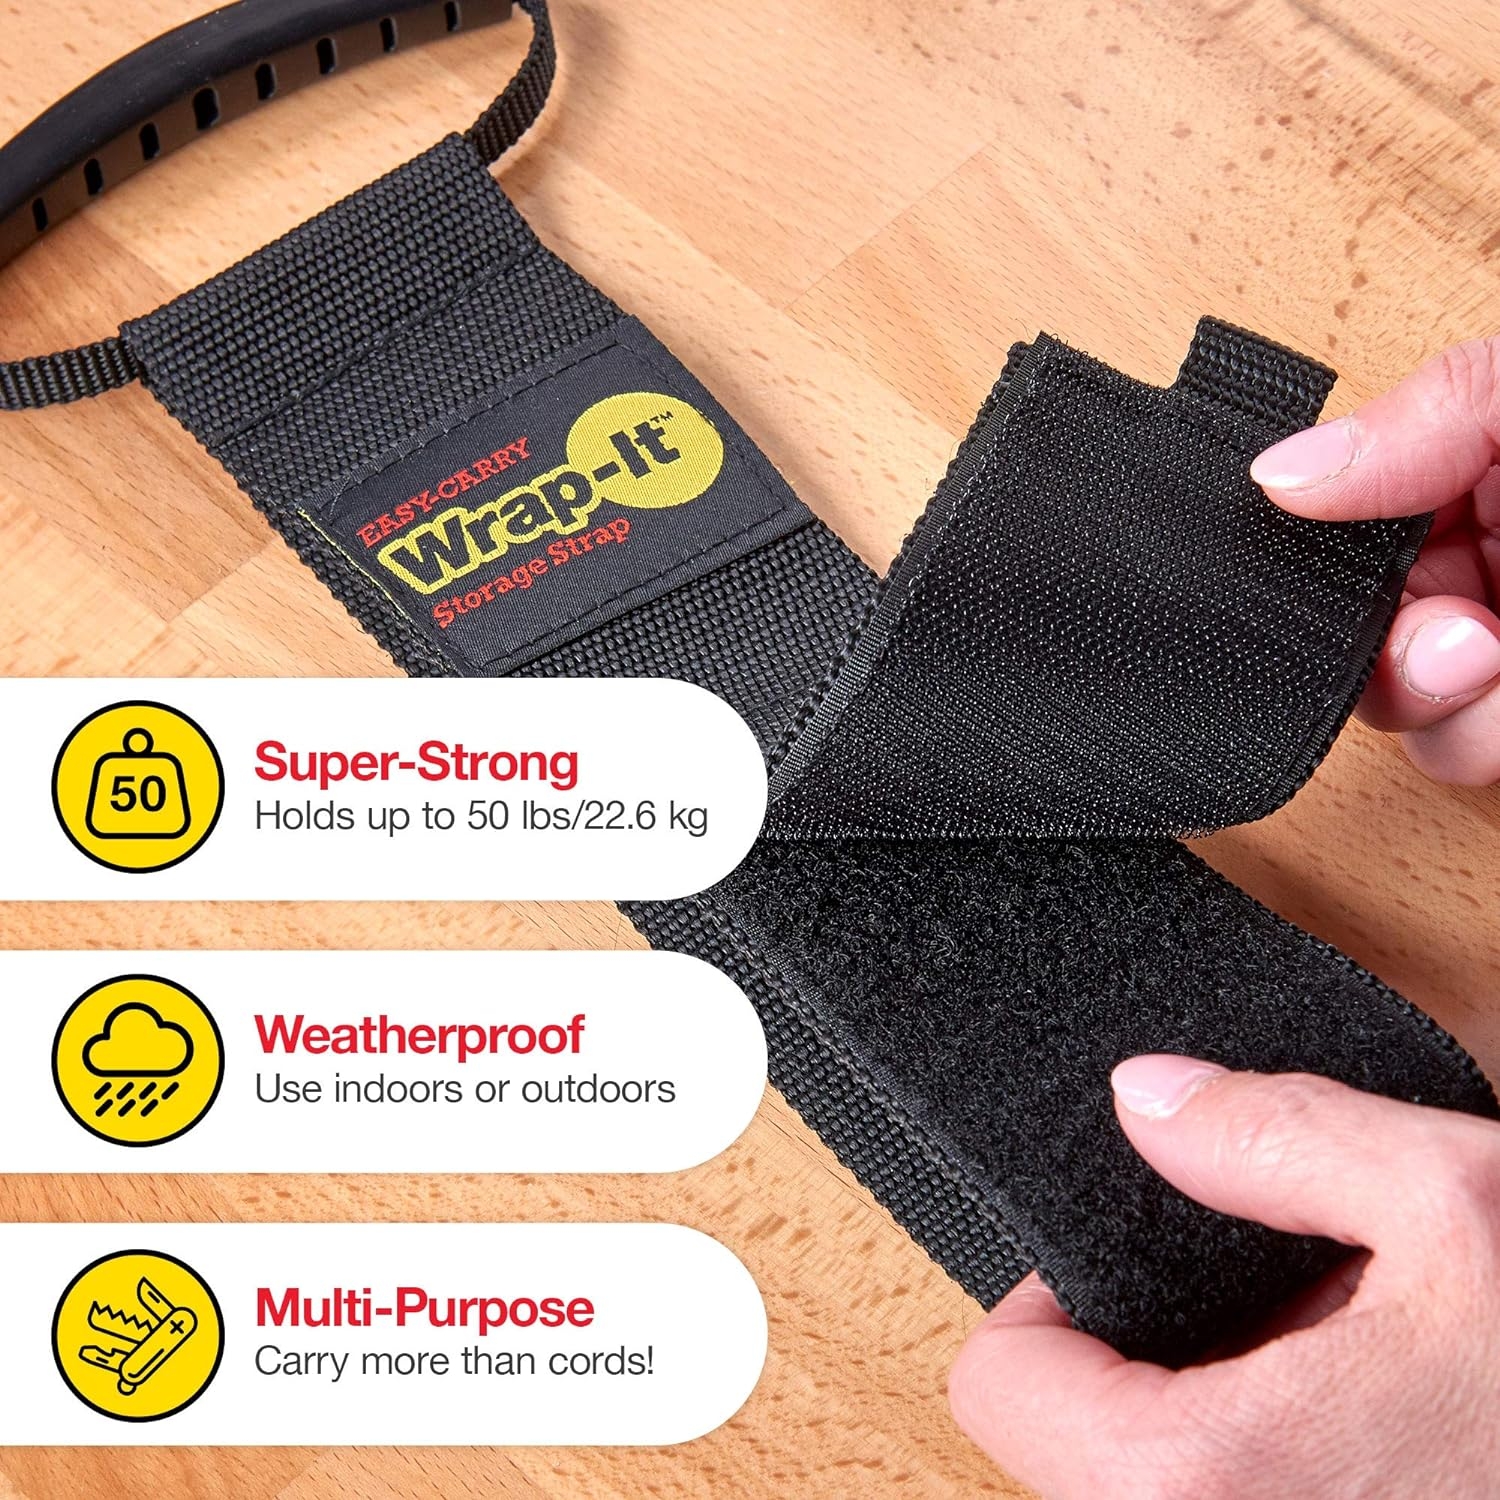 Easy-Carry Wrap-It Storage Straps - 17” (2 Pack) – Heavy-Duty Hook and Loop Cord Carrying Strap, Hanger, and Organizer with Handle for Extension Cords, Electric Cables, Hoses and More